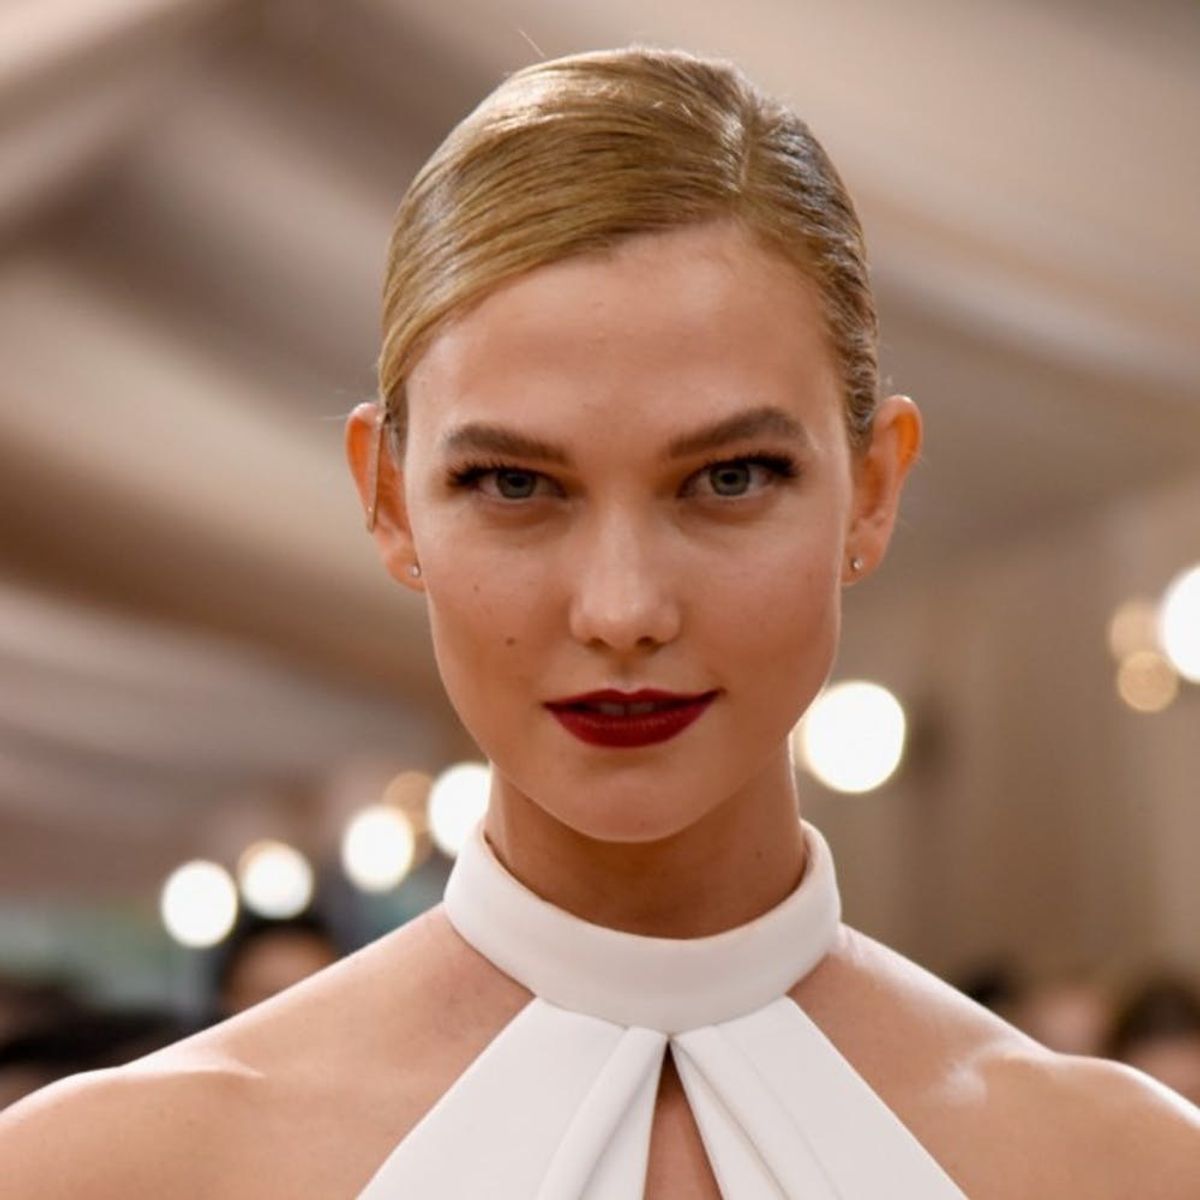 Karlie Kloss Just Debuted a ’70s Curly Hairstyle